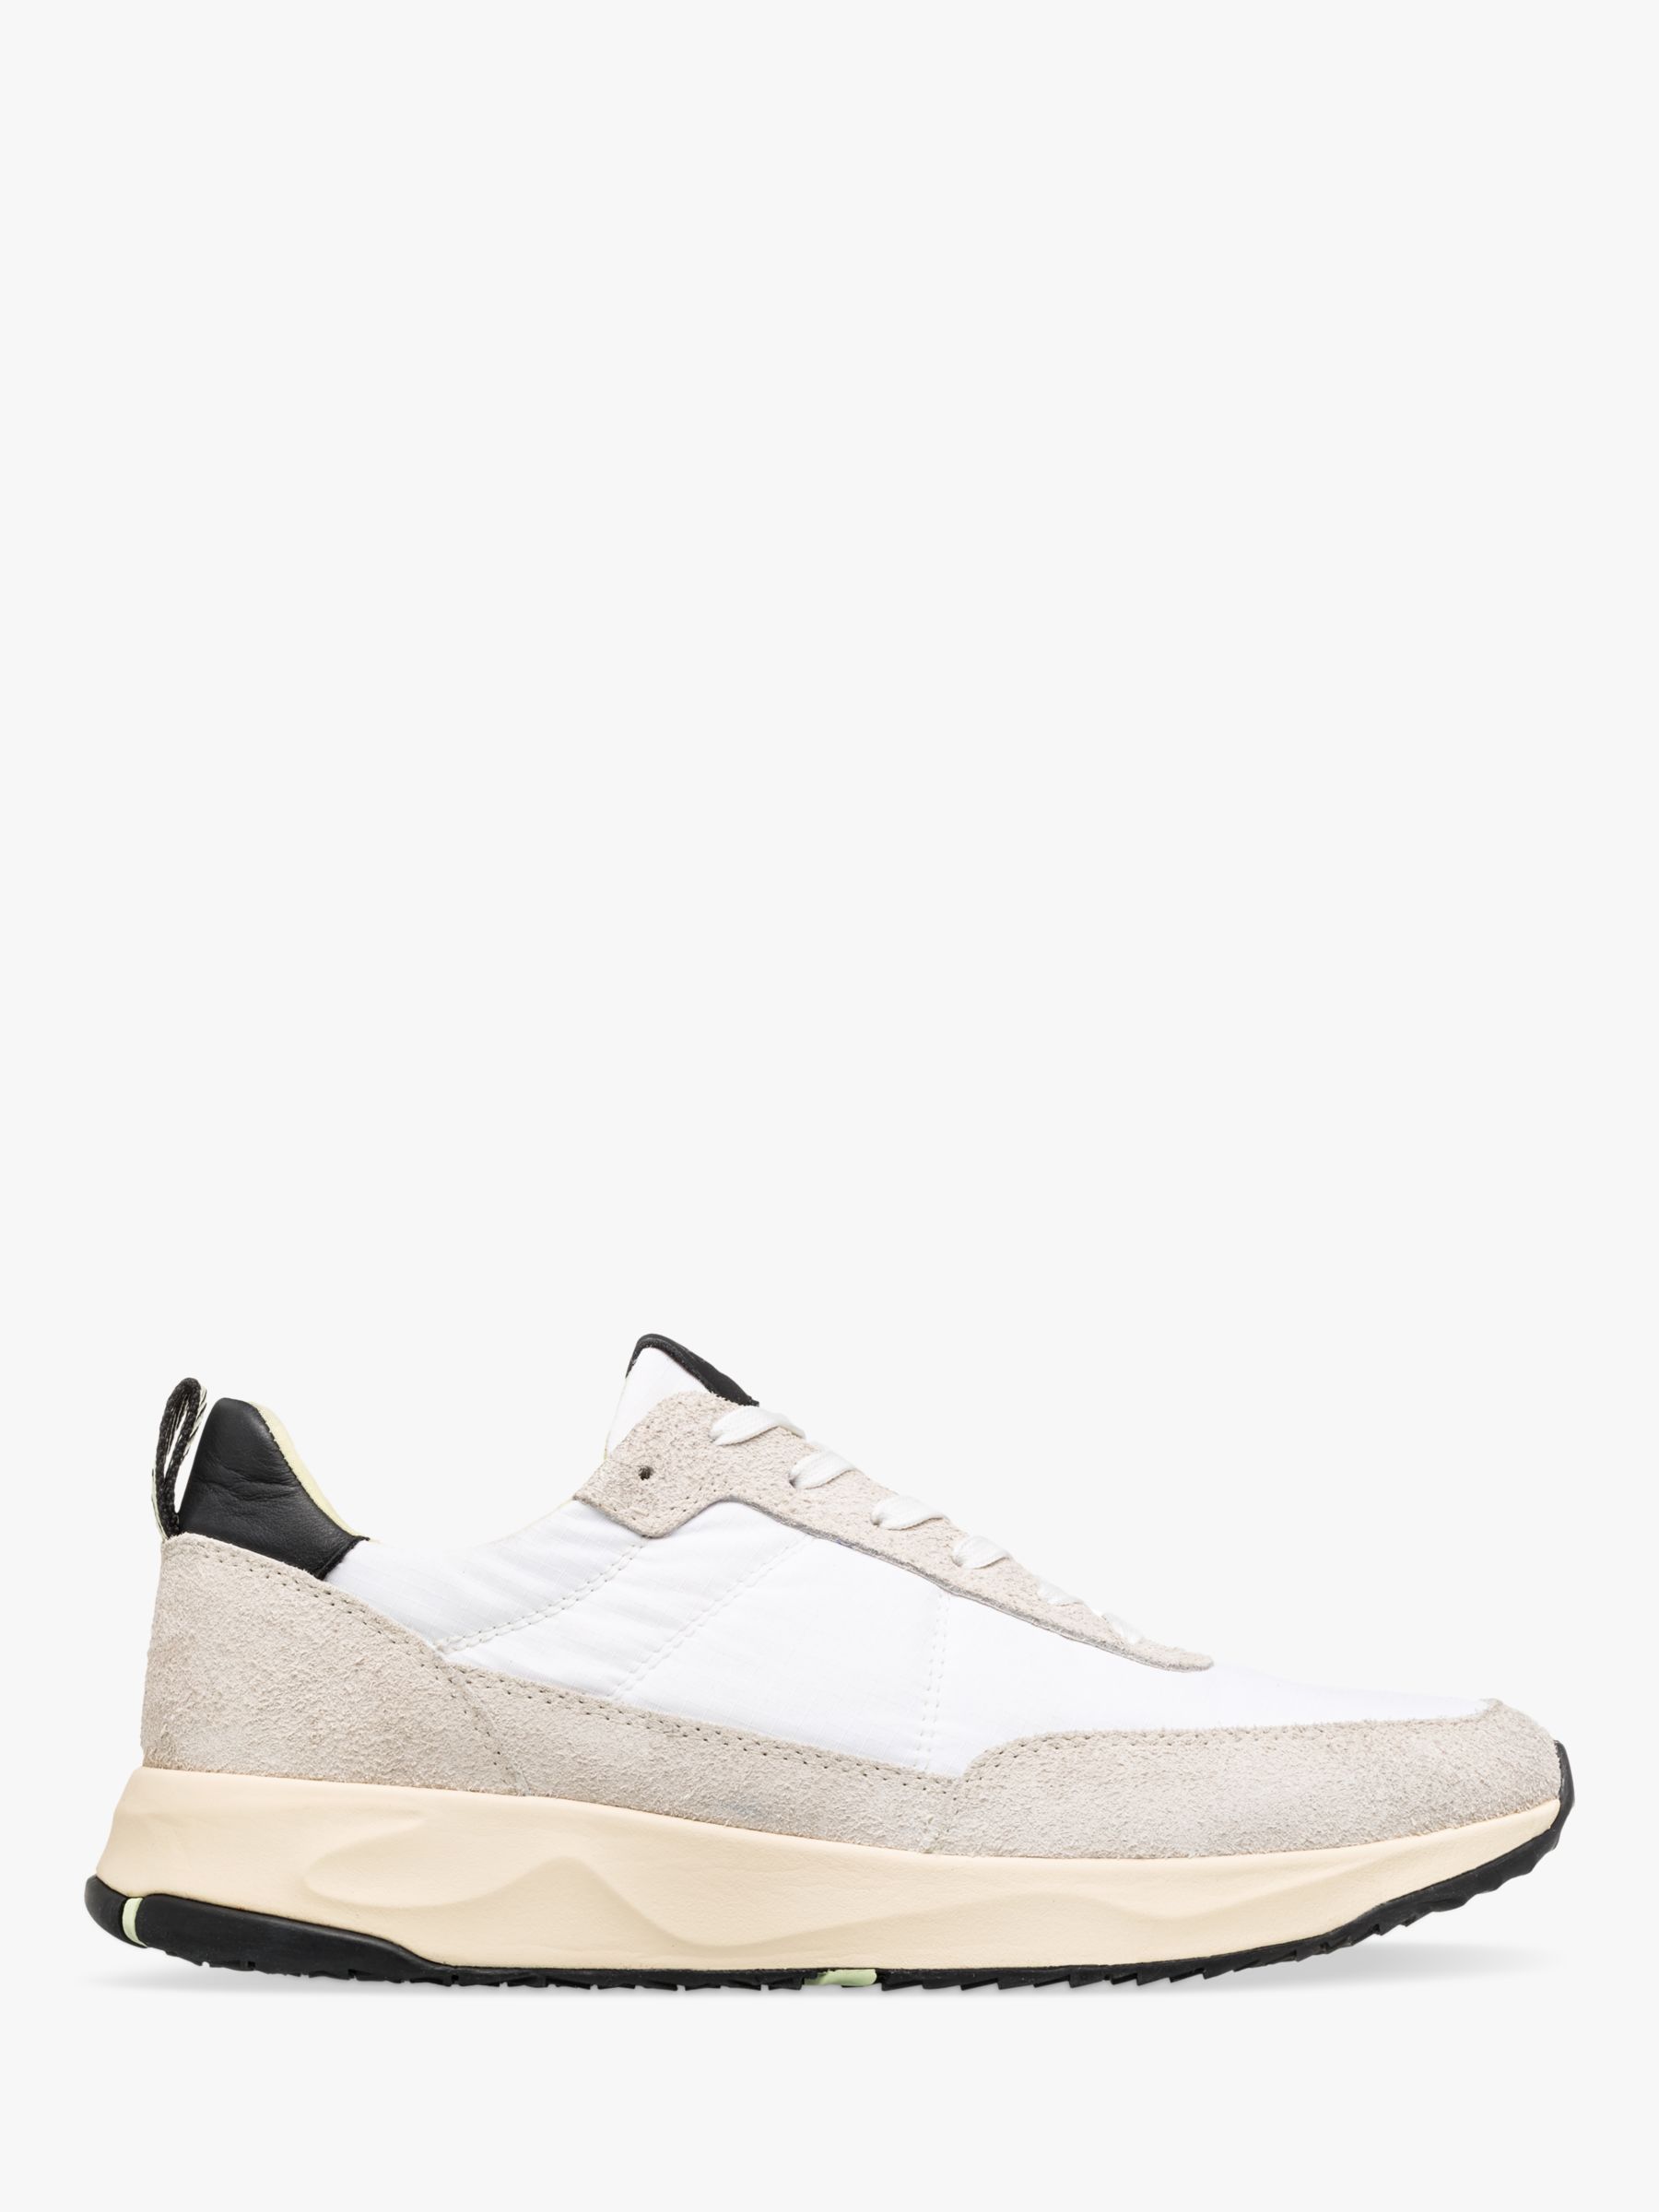 CLAE Owens Suede Lace Up Trainers, White/Black, 8